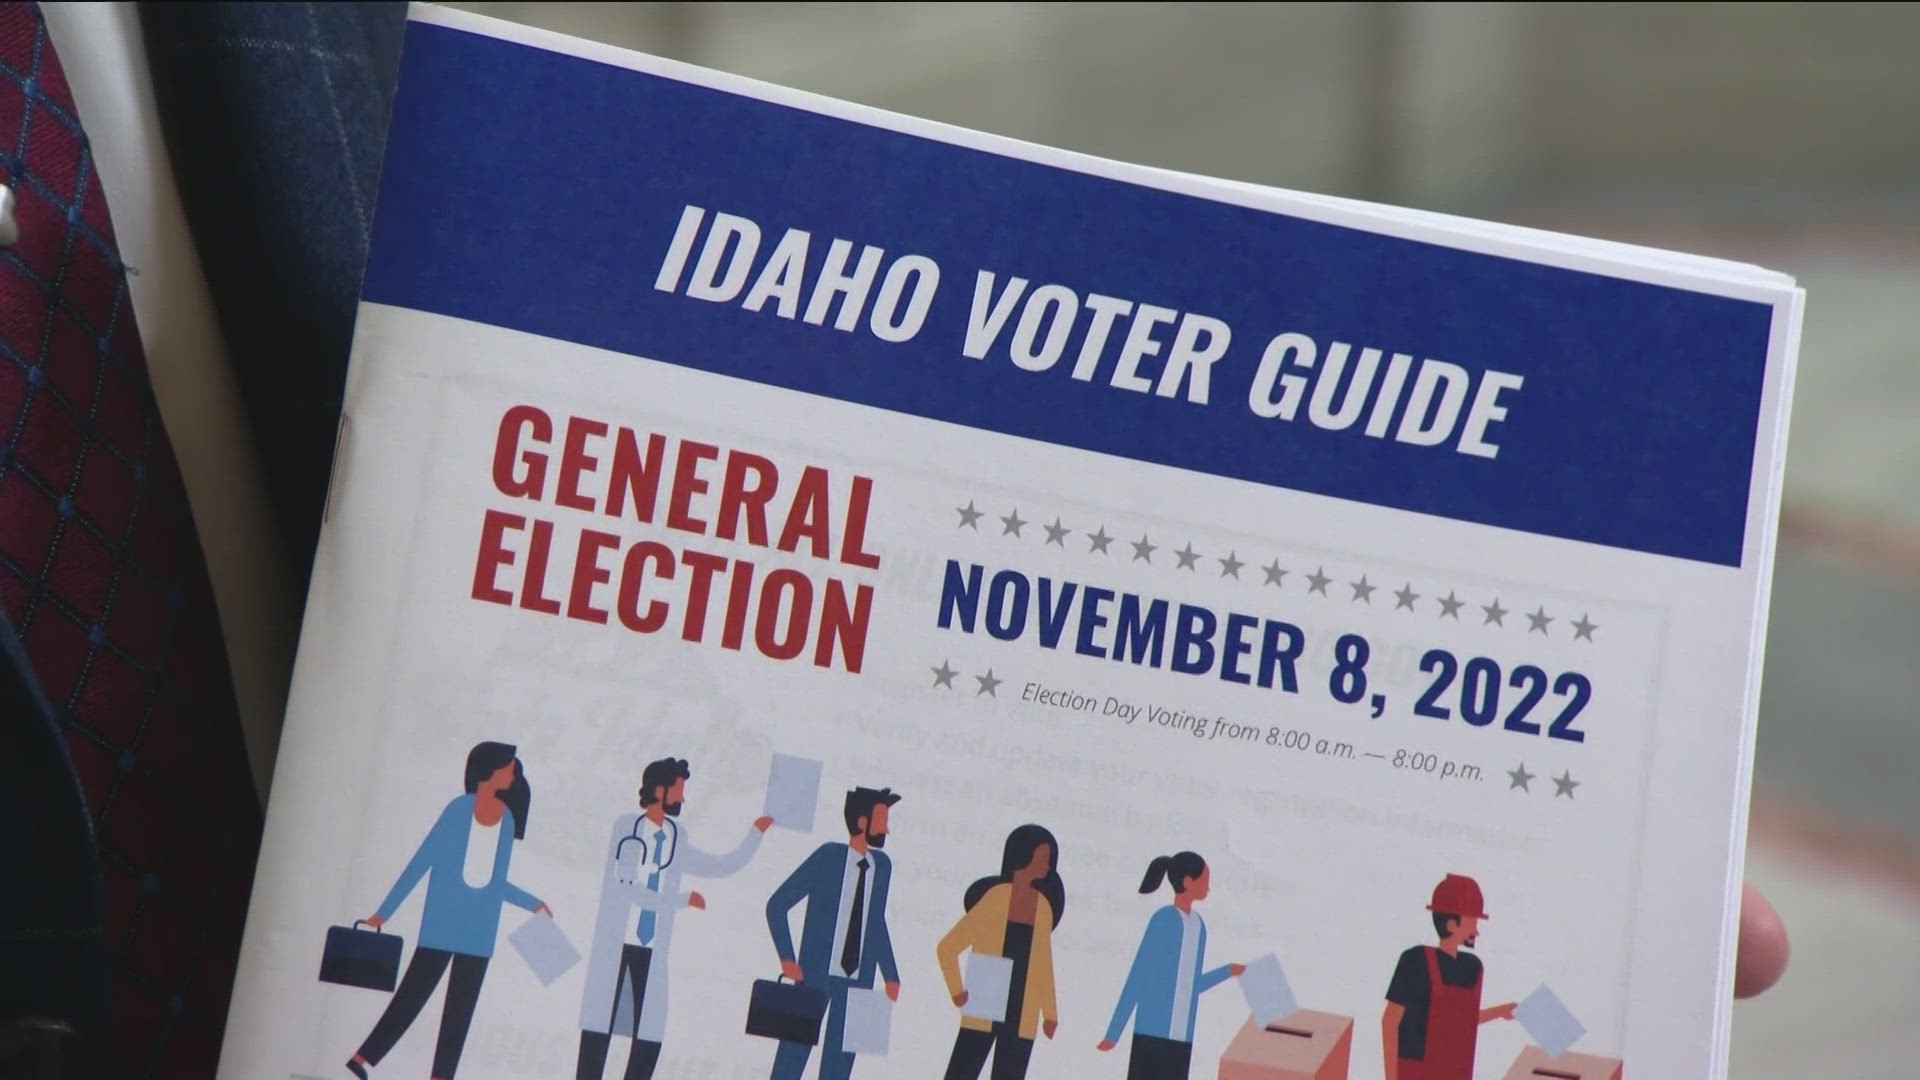 Idaho does not send voter guides ahead of the election to Idaho voters.